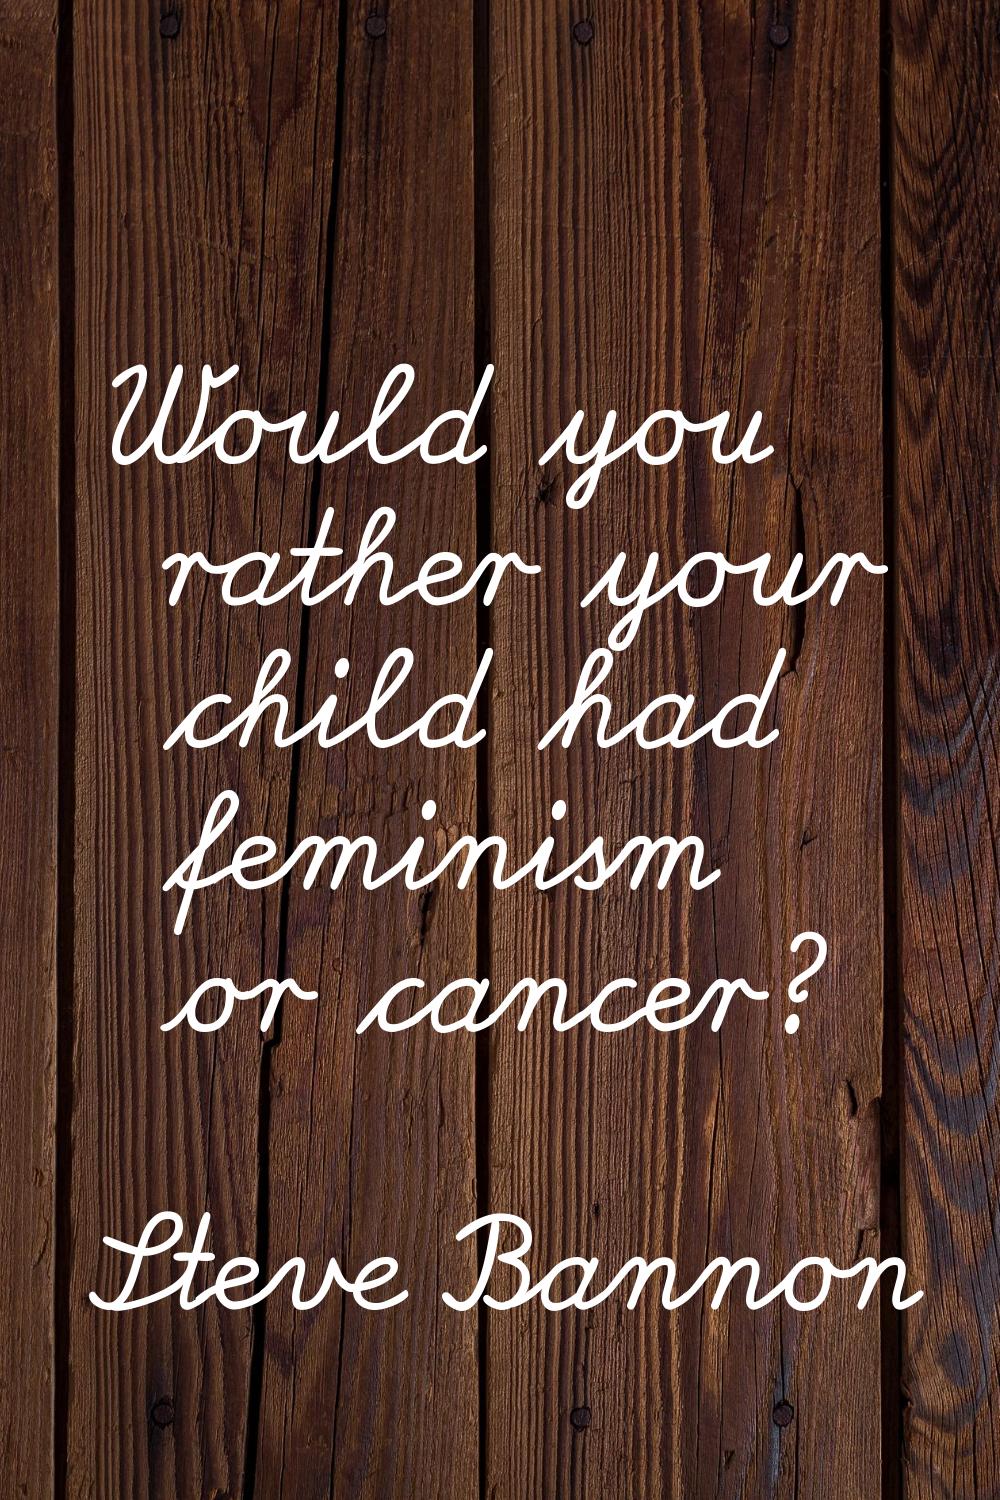 Would you rather your child had feminism or cancer?